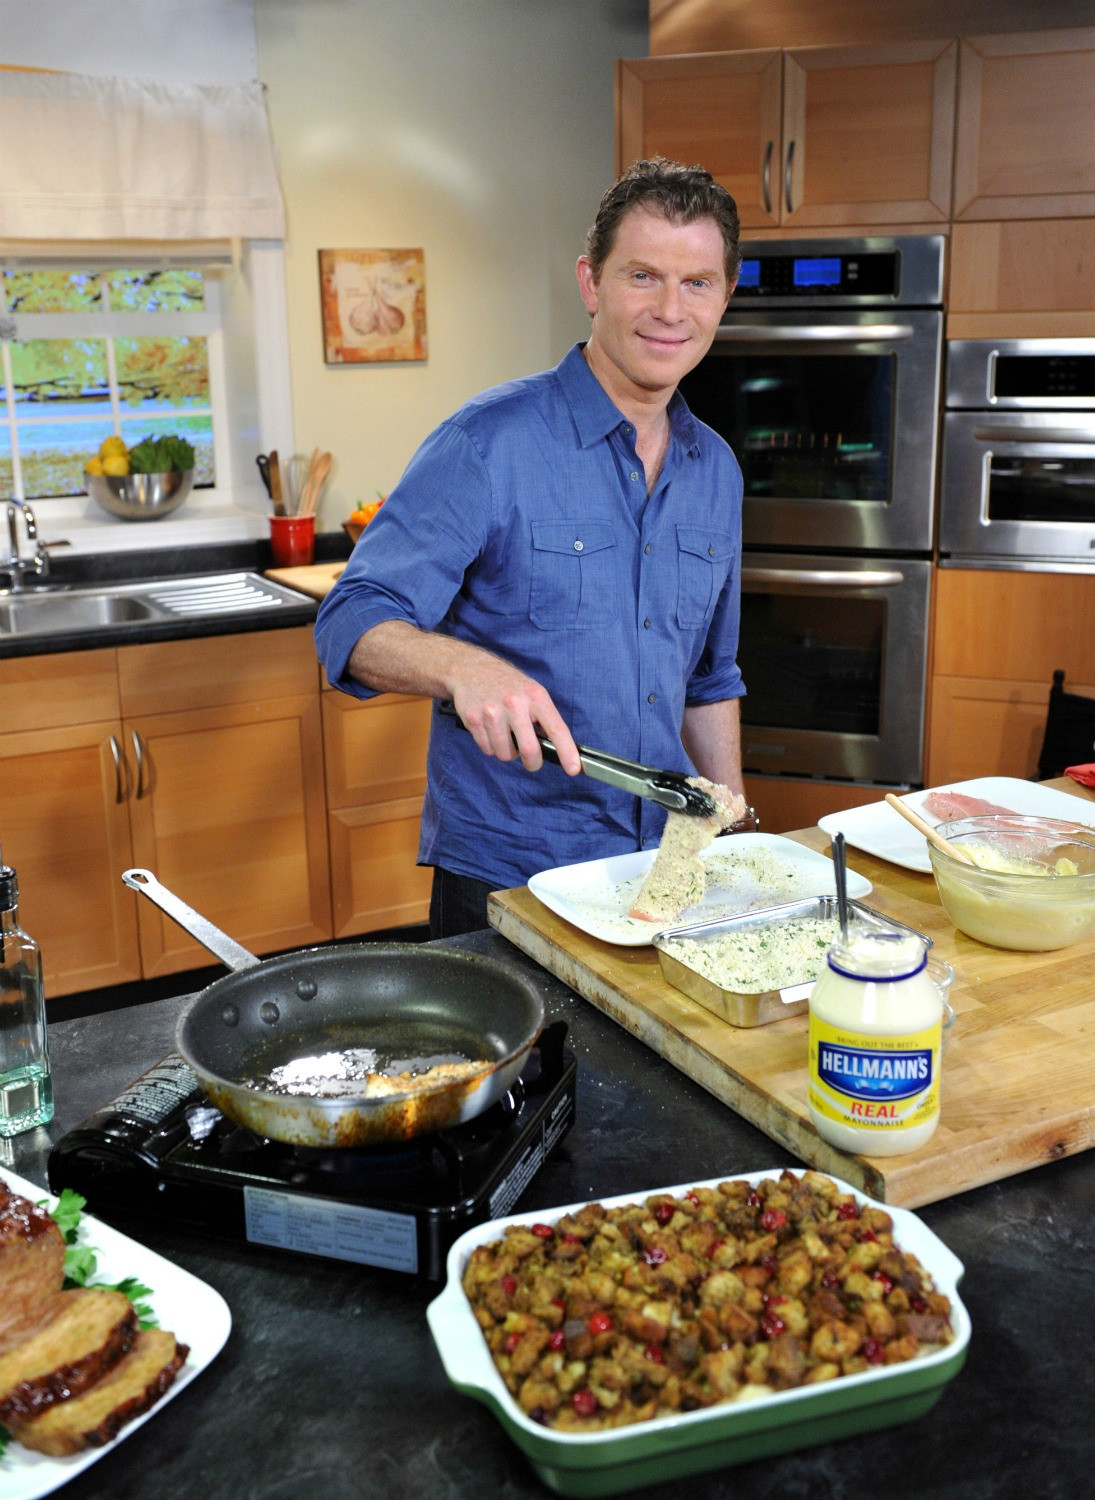 Bobby Flay Thanksgiving Turkey Recipe
 Hellmann s Turkey Challenge Try something different this